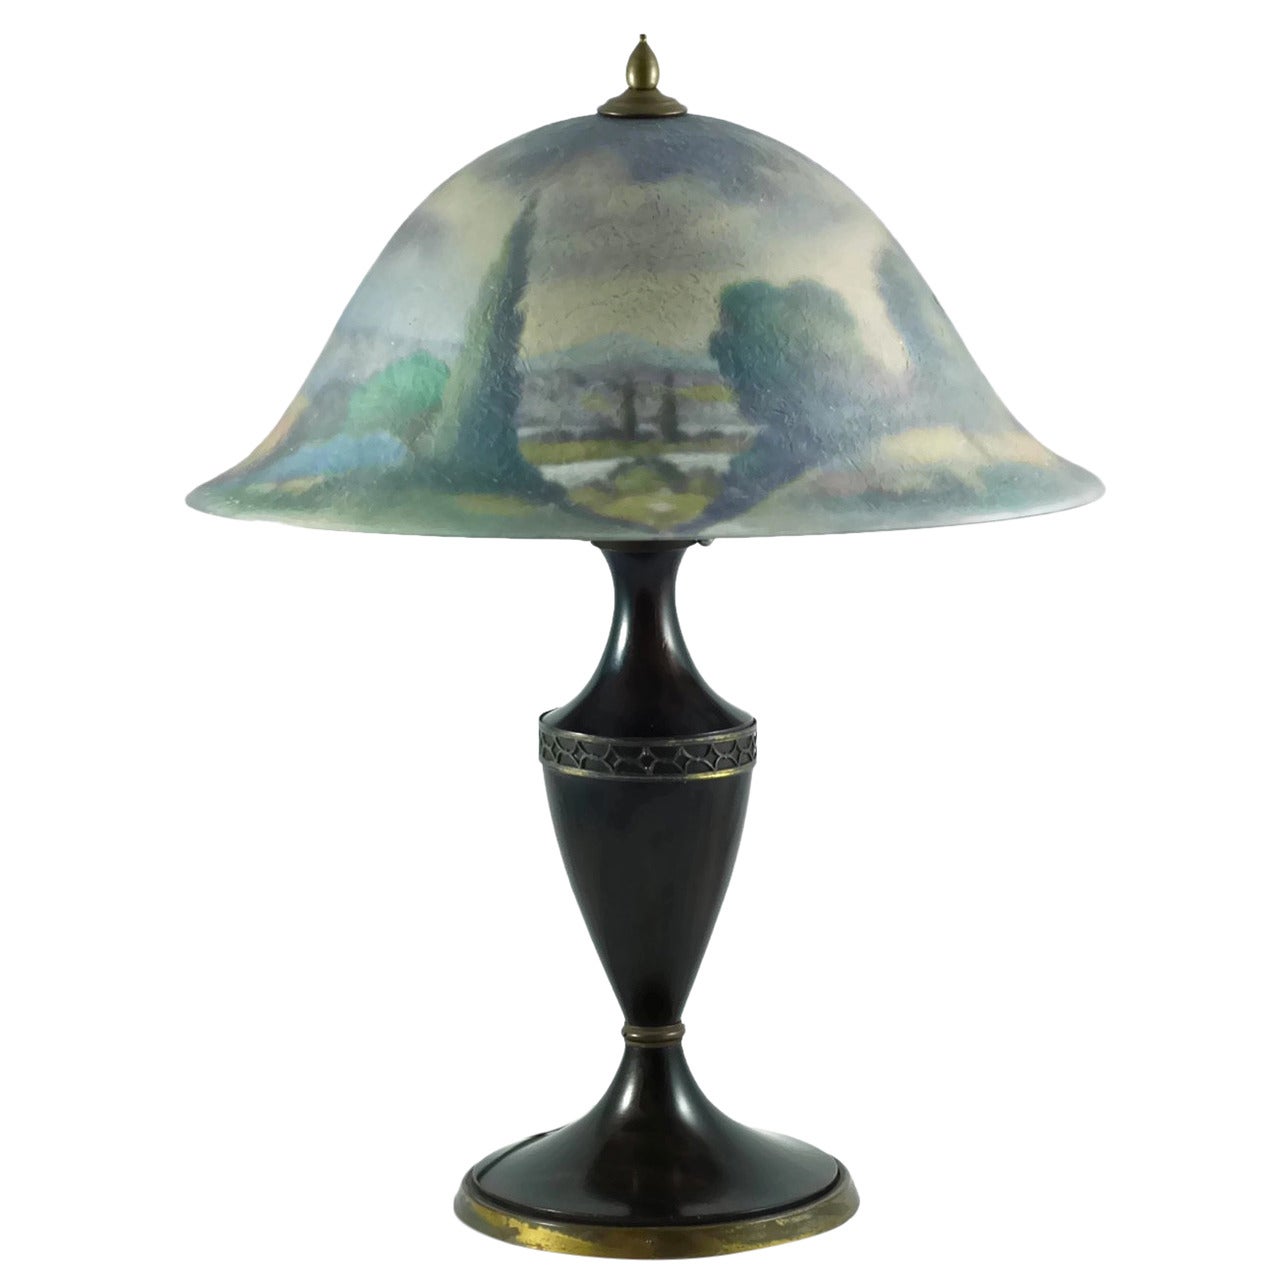 Pairpoint Reverse Painted "Copley" Lamp Shade with Mahogany and Brass Base